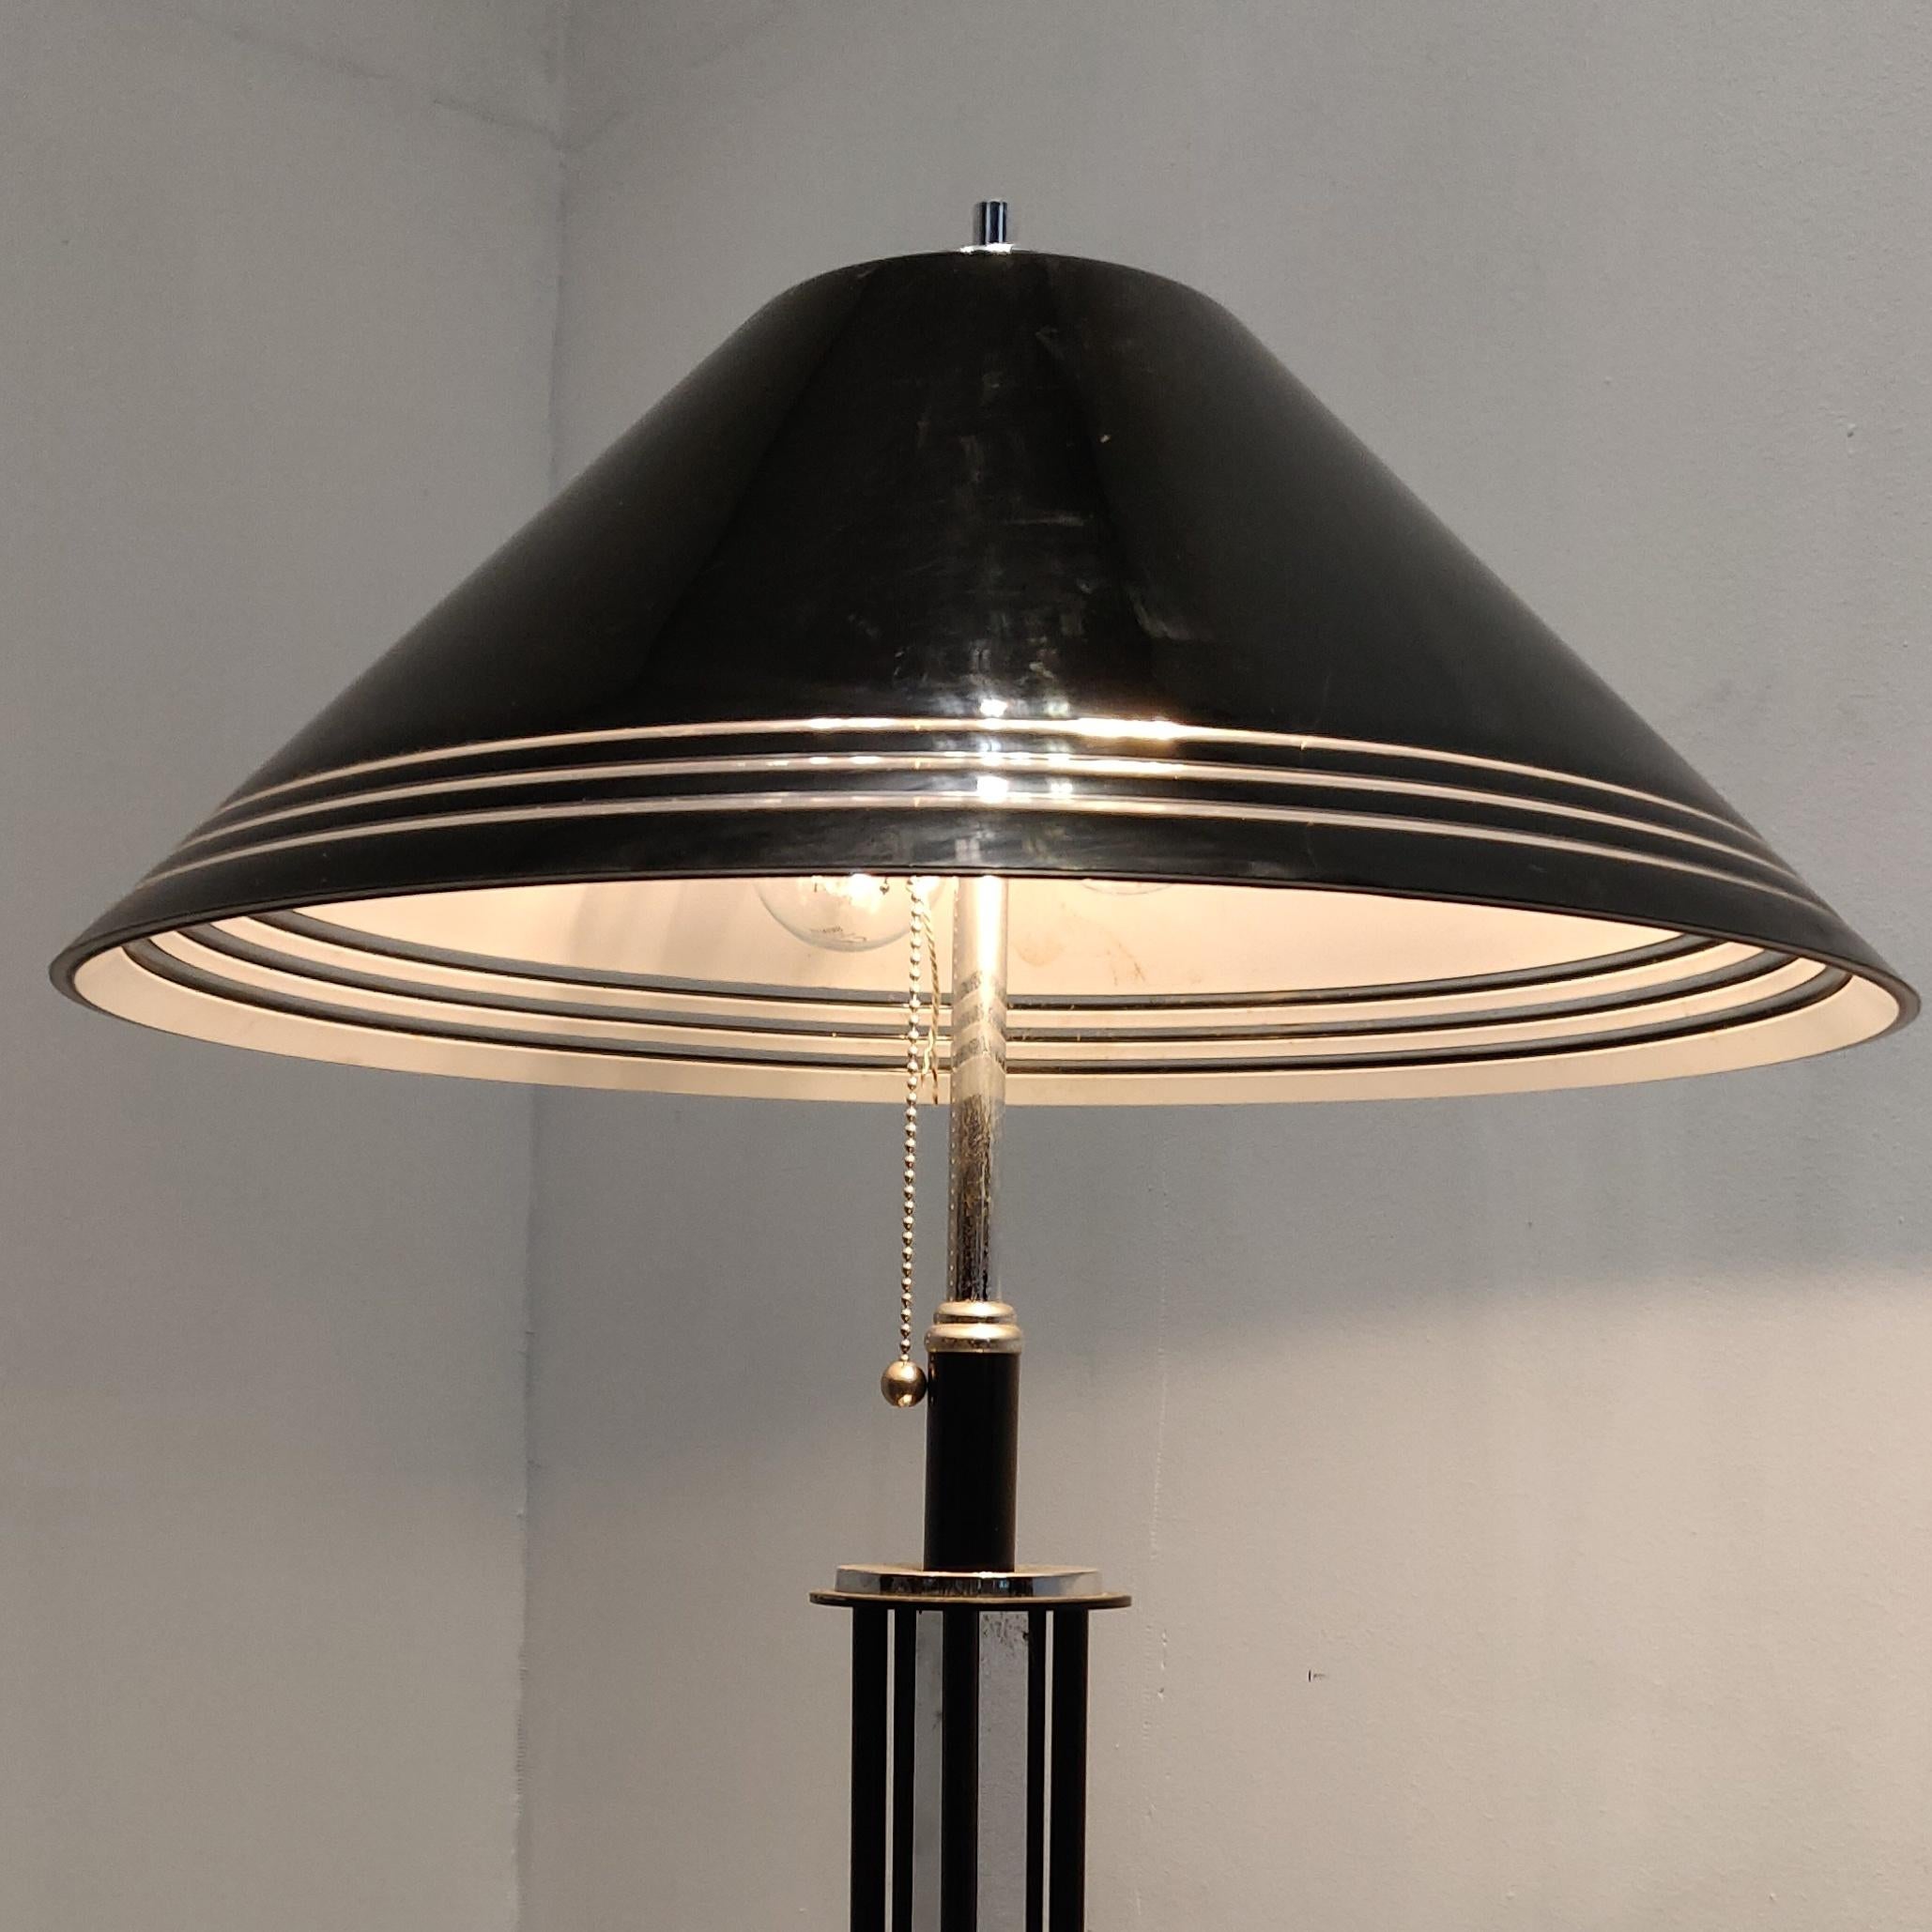 Metal 20th Century Hollywood Regency Floor Lamp in style of Willy Rizzo. For Sale